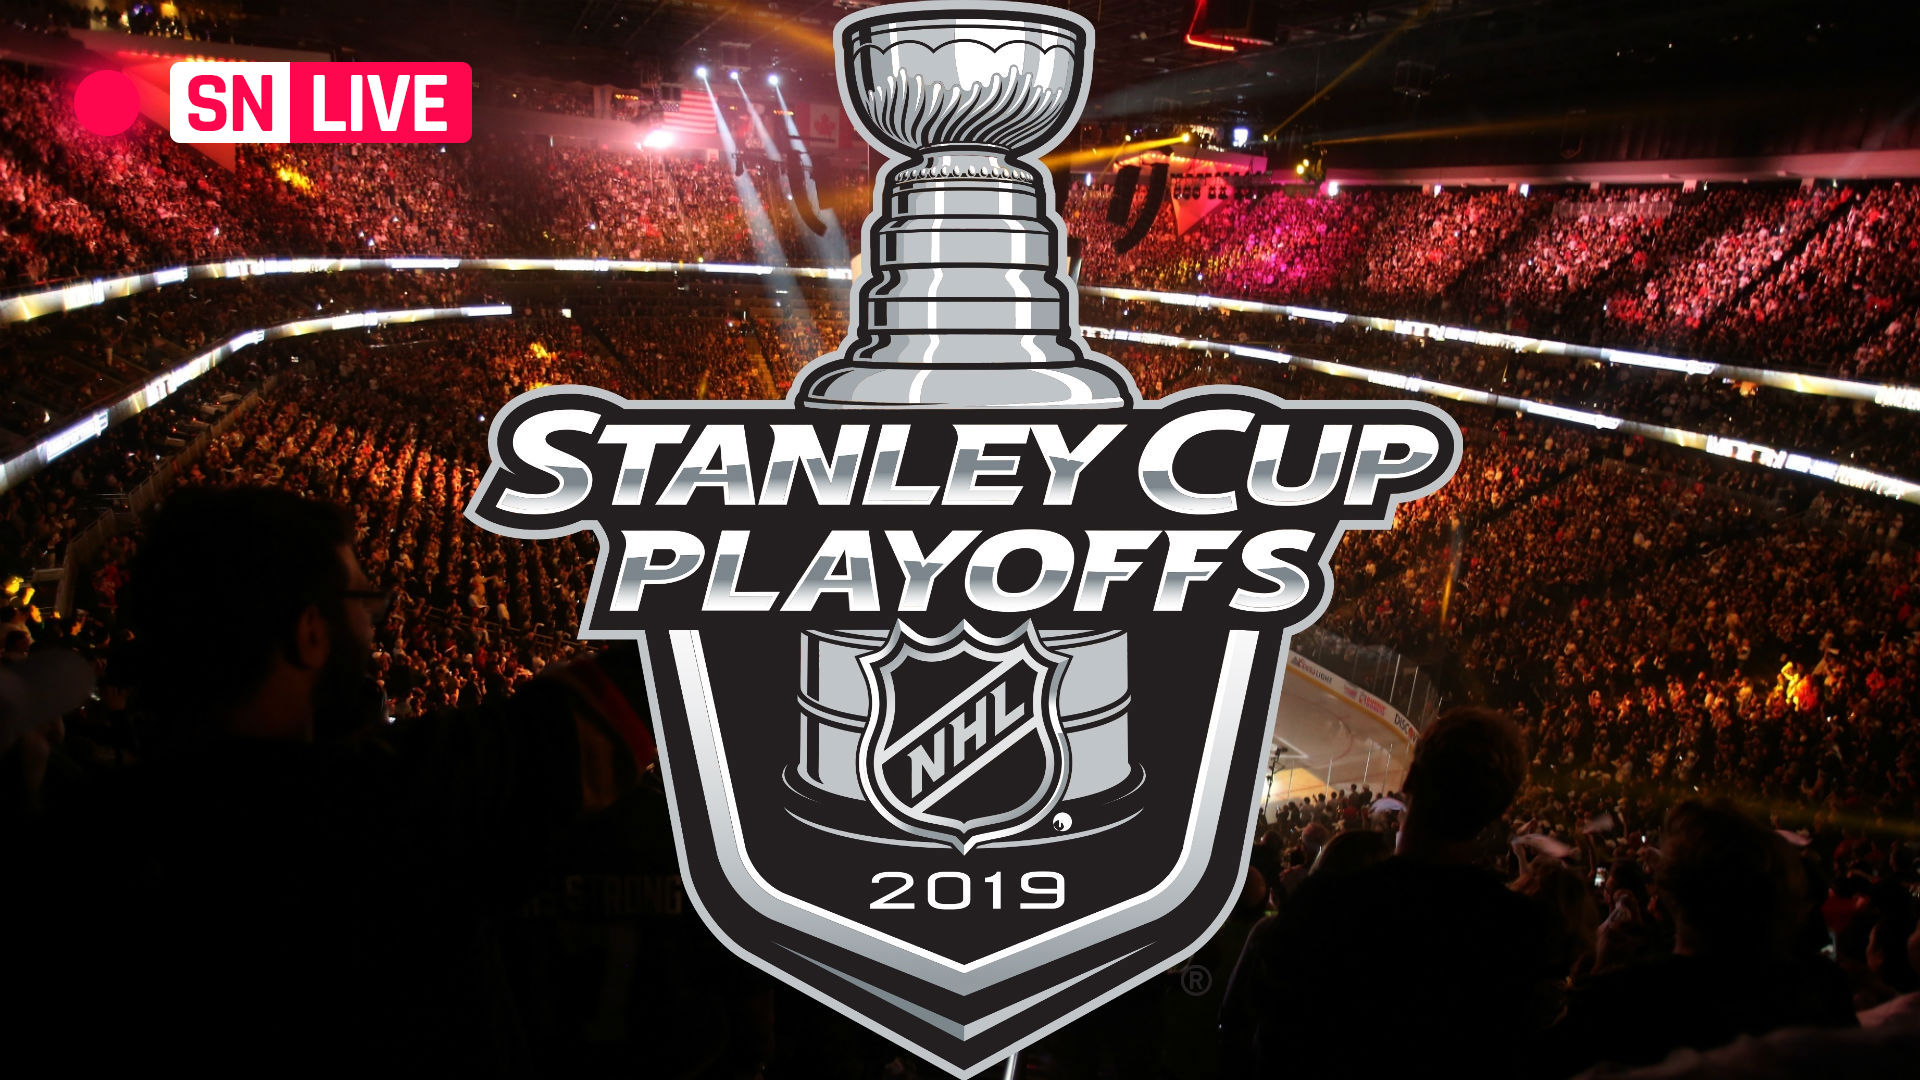 NHL playoffs today 2019 Live scores, TV schedule, updates from